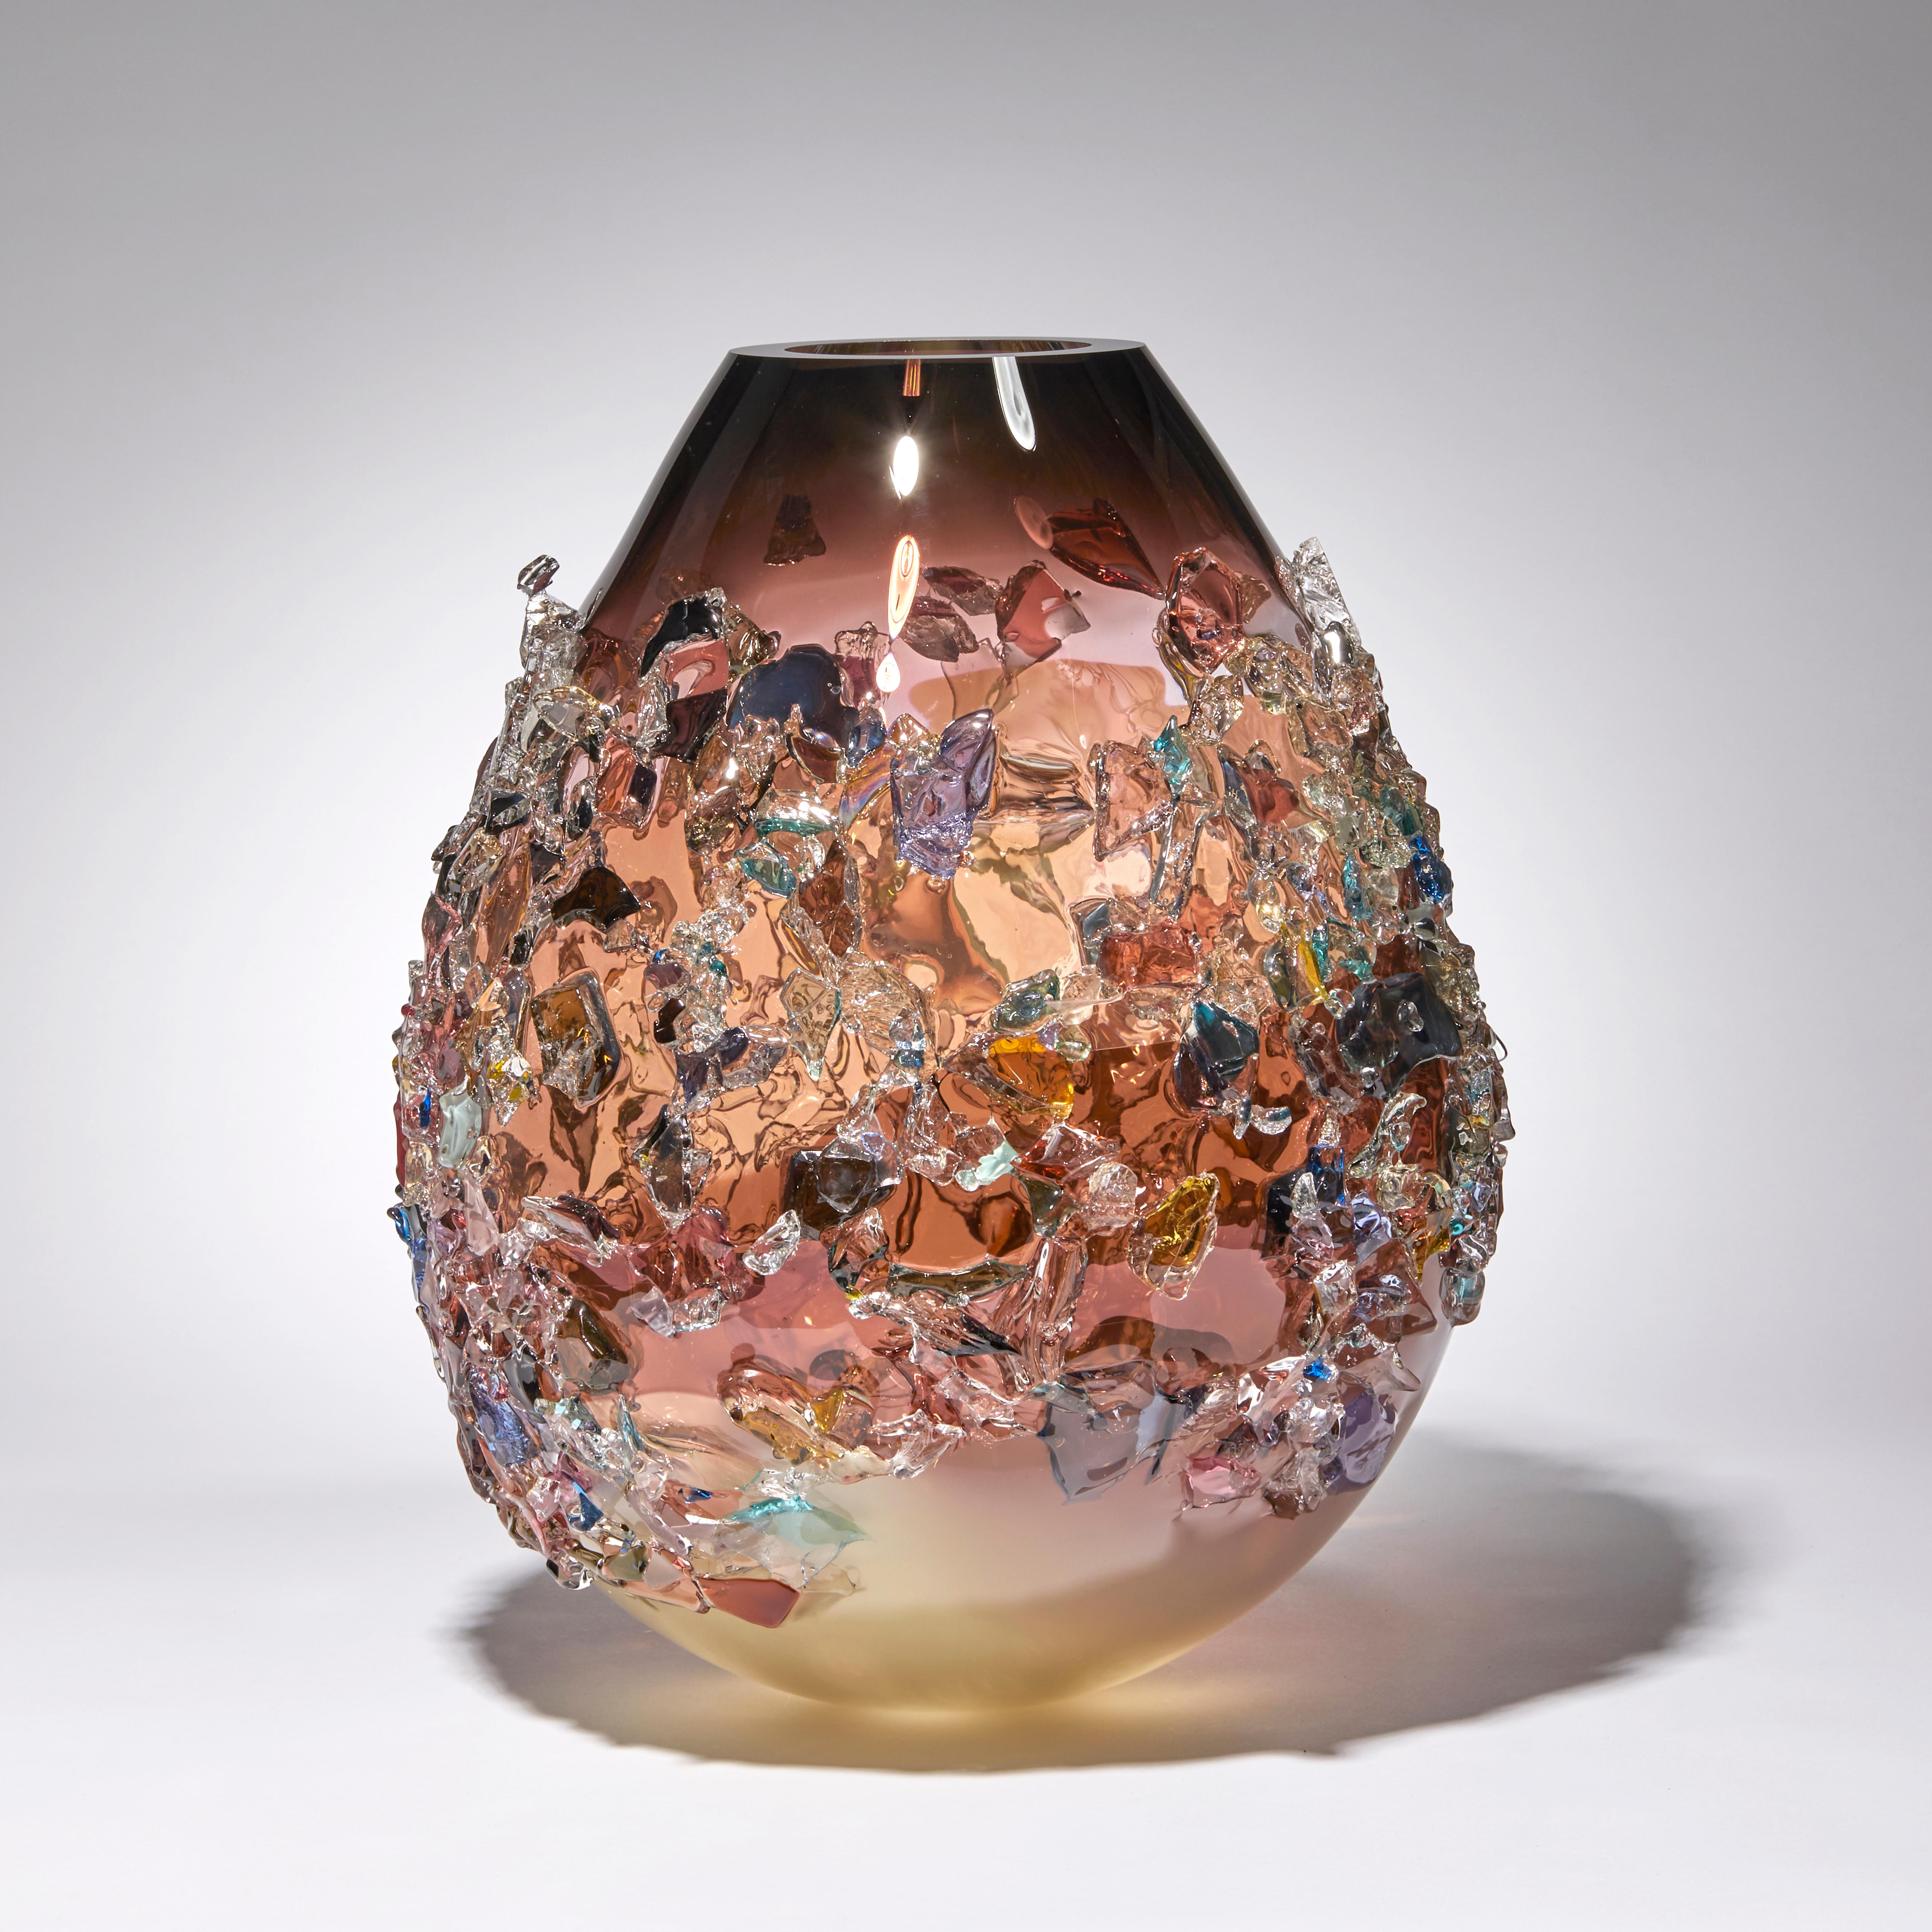 Sakura TRP20017 is a unique dark pink, ivory / alabaster and multicolored hand blown art glass sculptural vase, covered in an organic glass shard adornment by the Dutch artist Maarten Vorlijk. The piece is flame polished to soften the edges of all